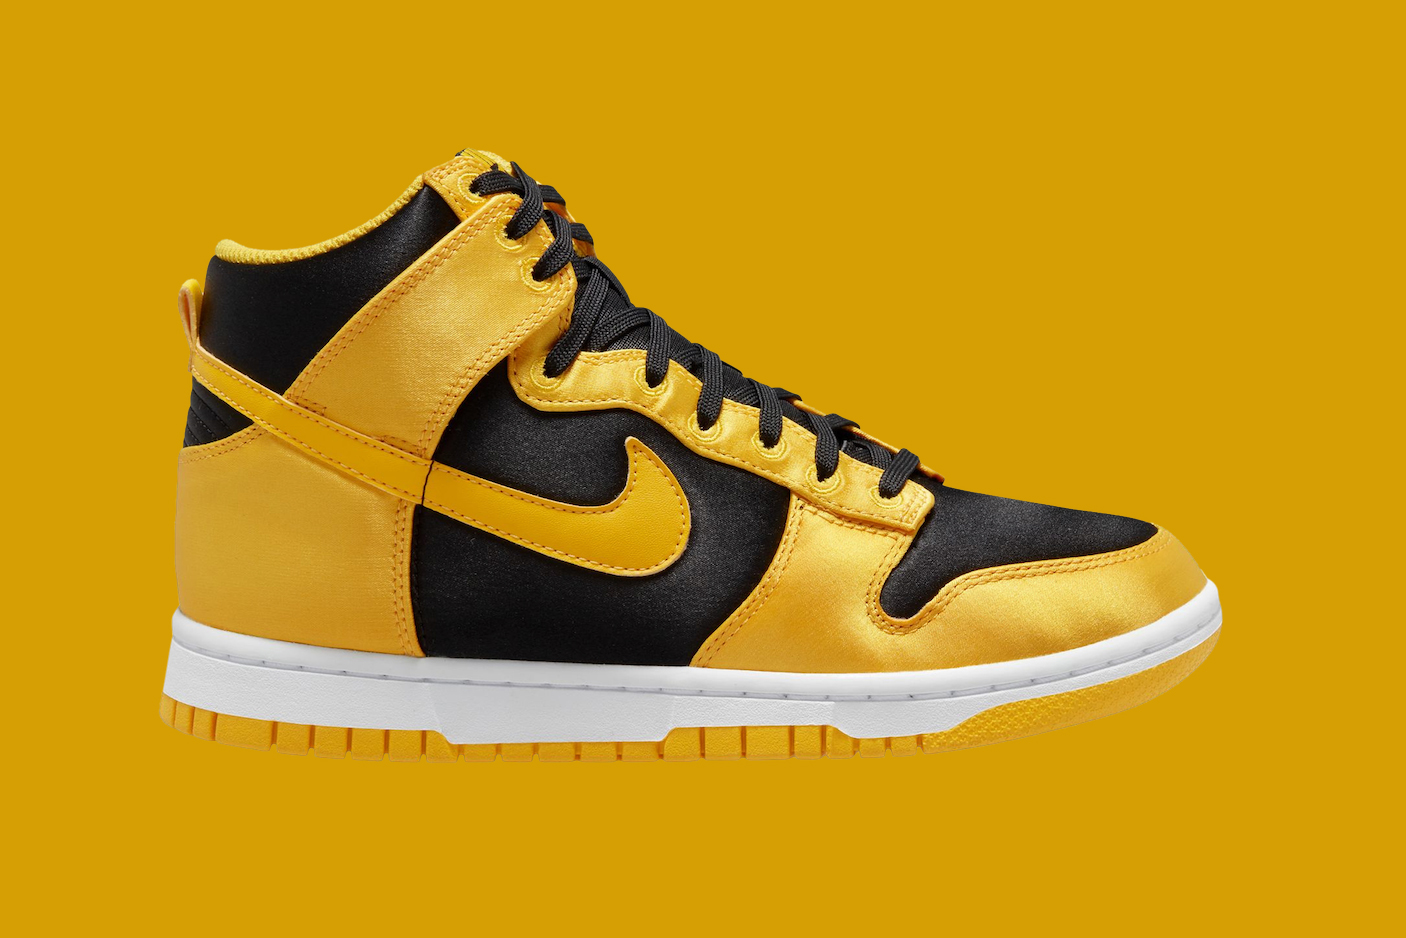 Turn Heads in the Nike Dunk Low “Satin Goldenrod”